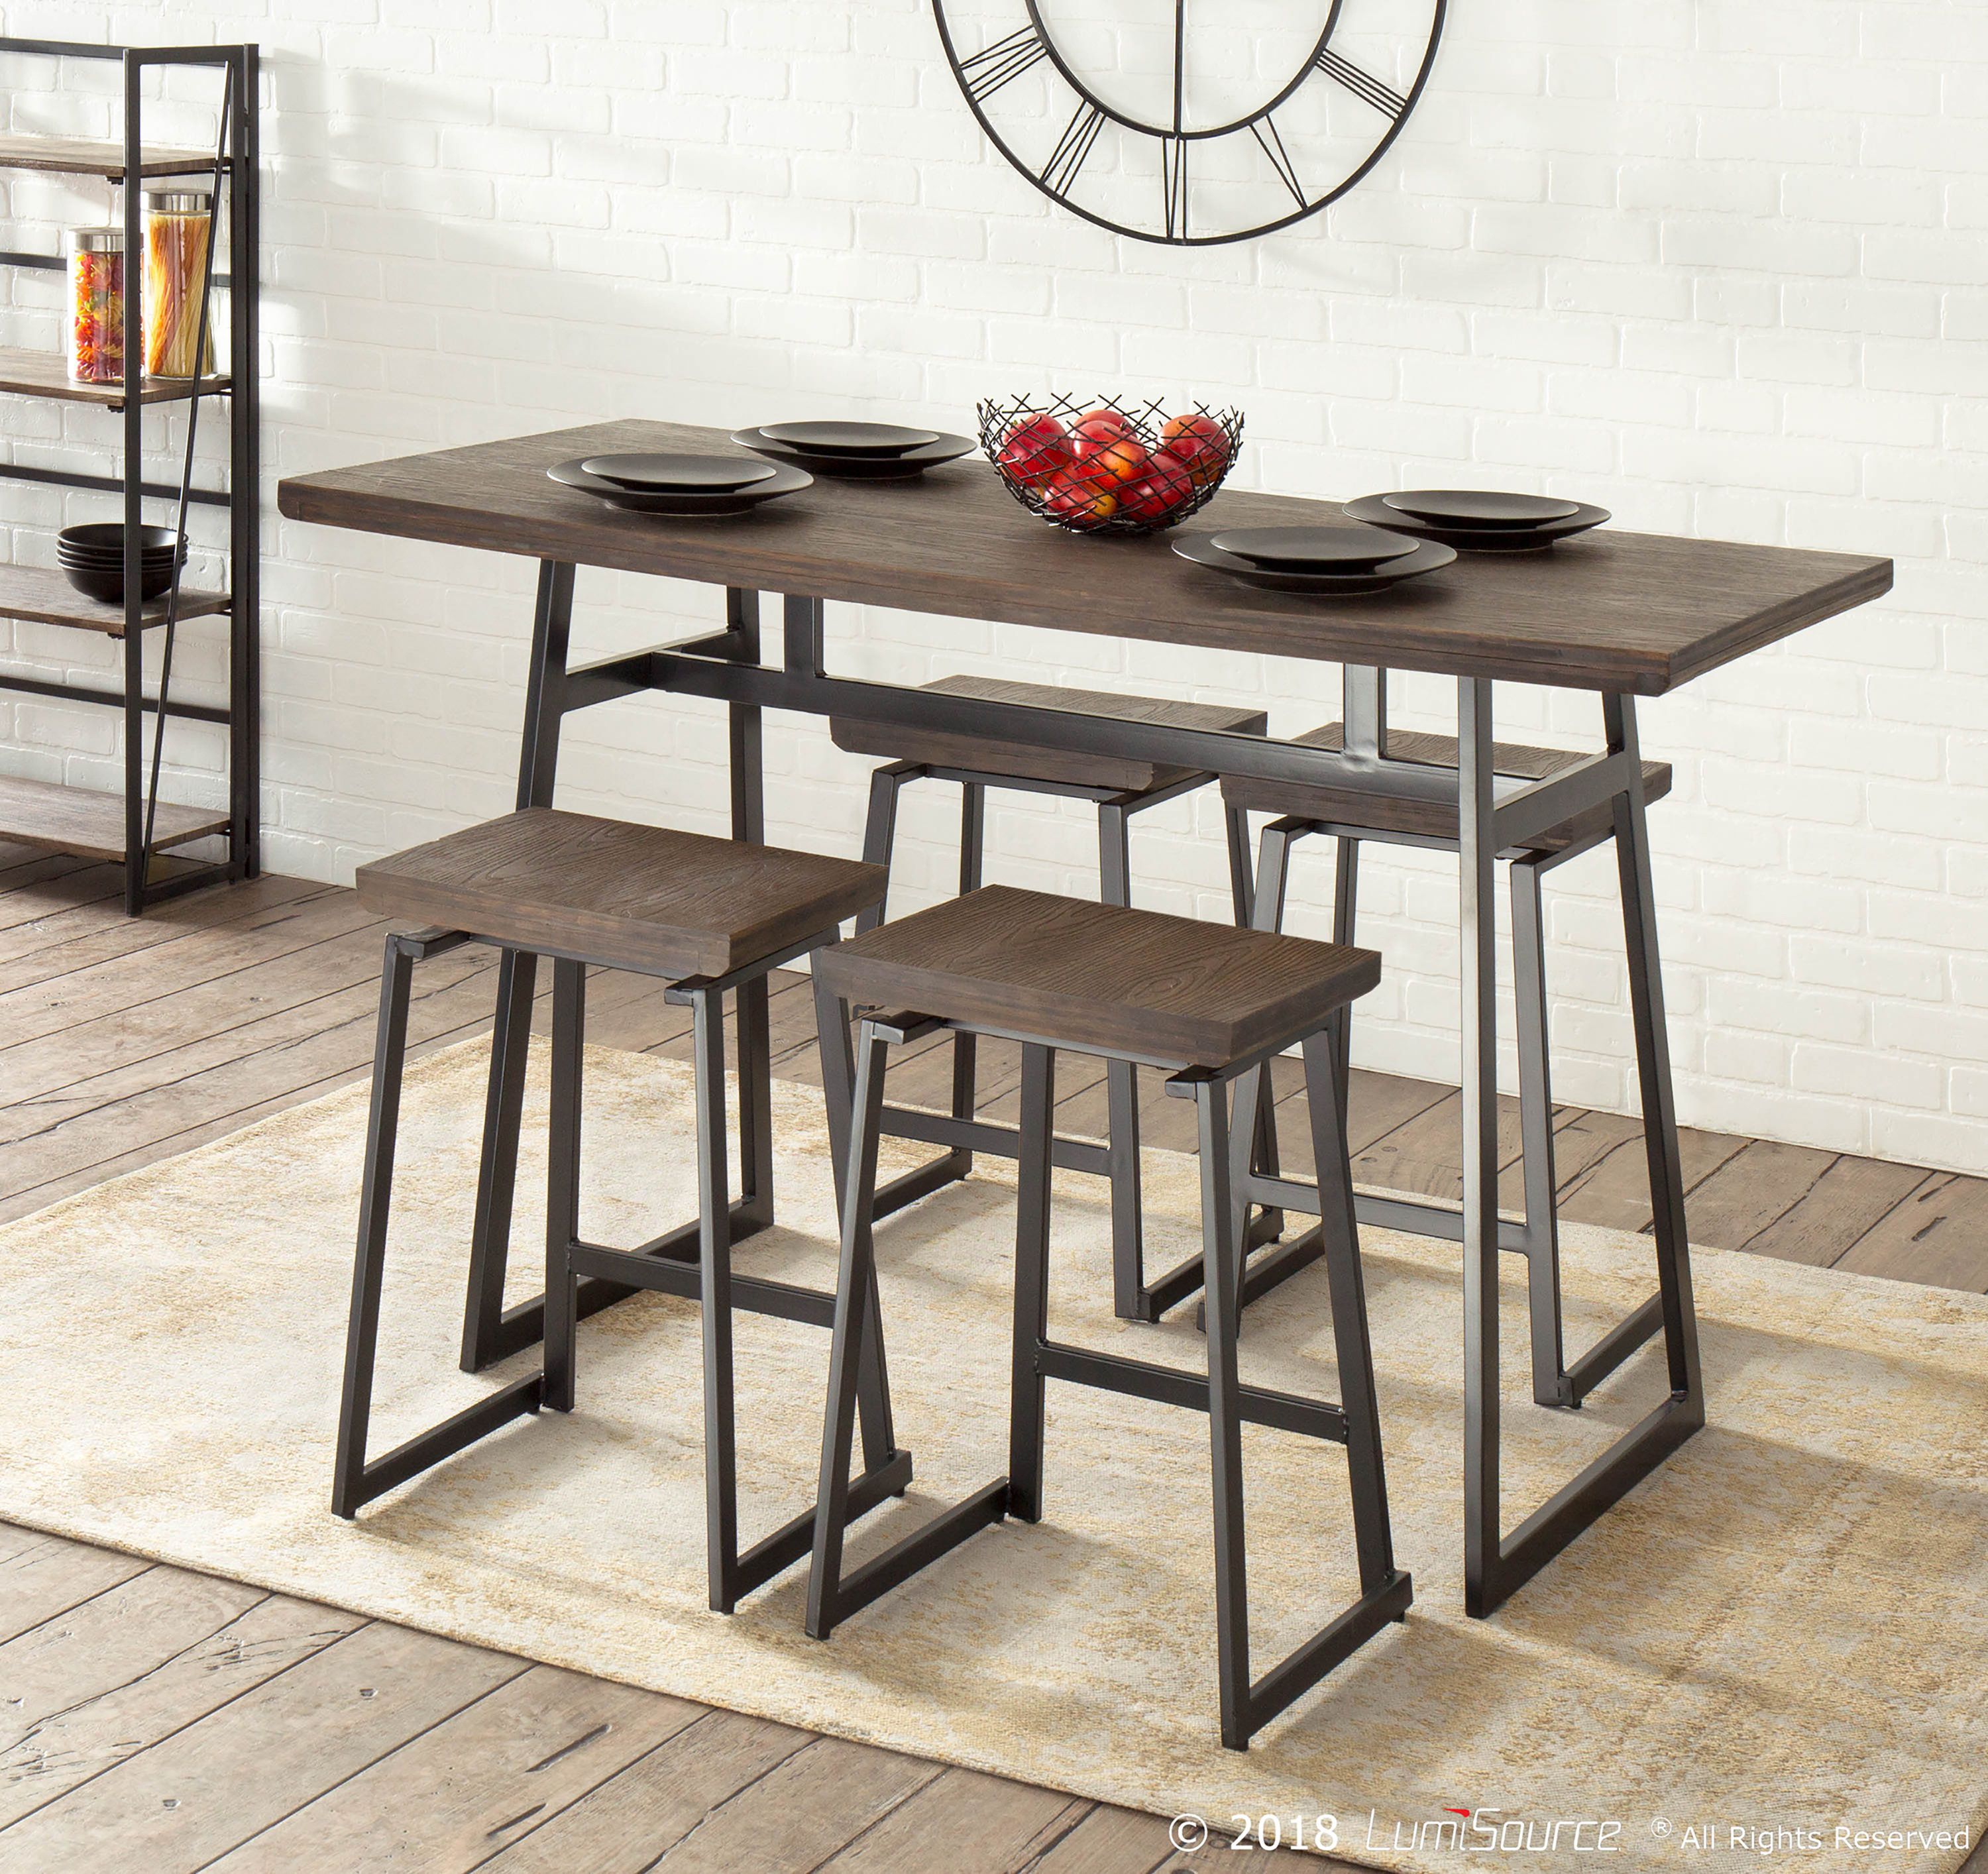 Cassiopeia Industrial 5 Piece Counter Height Dining Set & Reviews Throughout Popular Weatherholt Dining Tables (View 6 of 20)